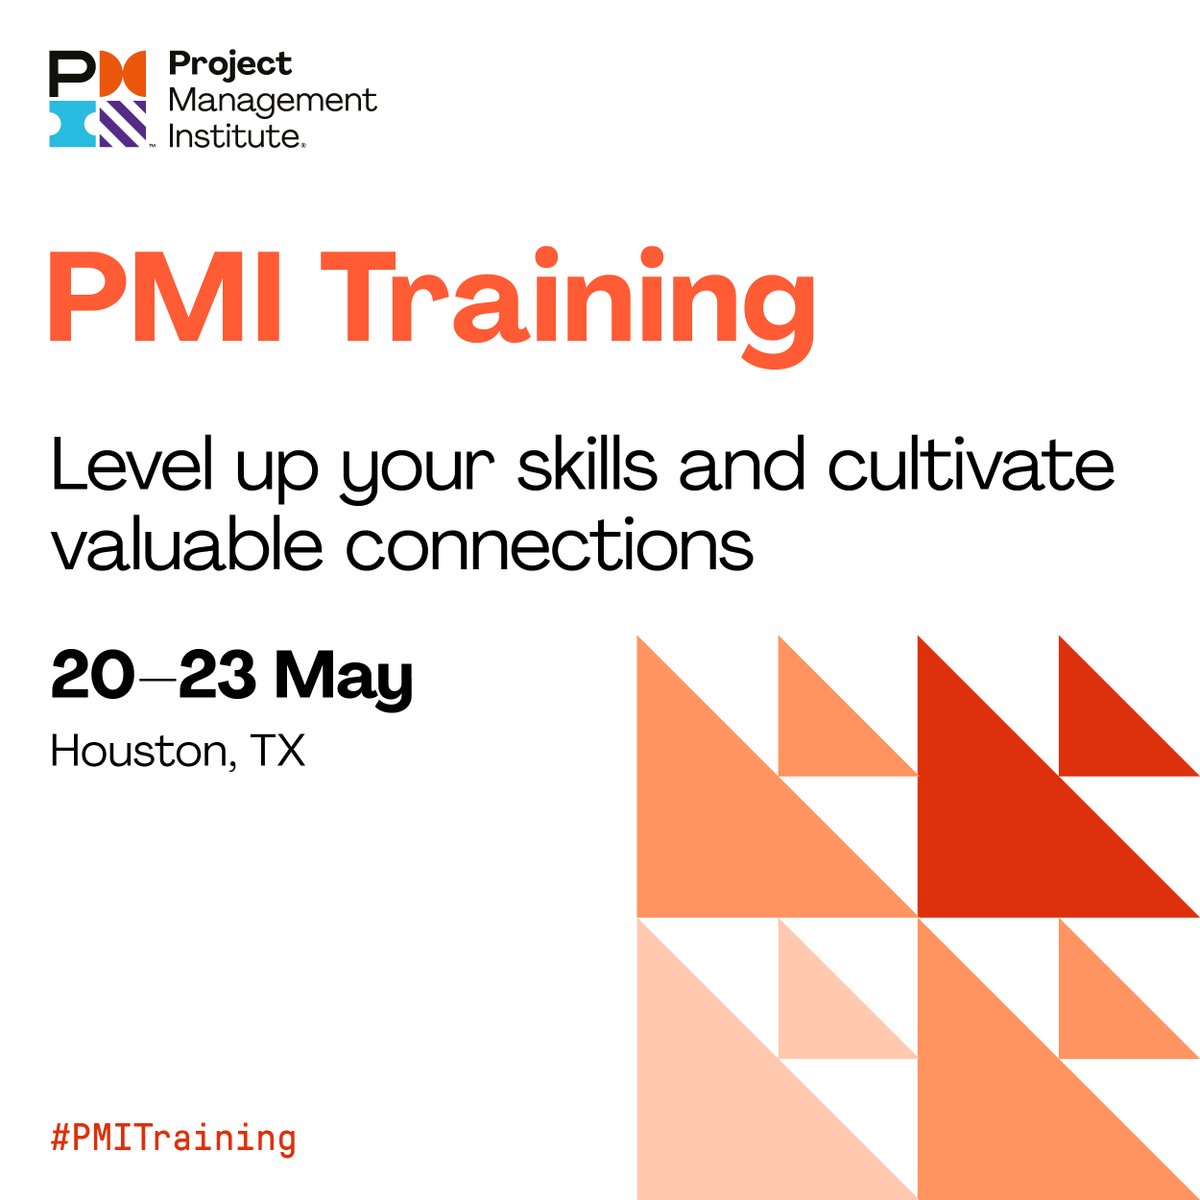 Last chance to register for #PMITraining in Houston this May! You'll gain valuable insights from experienced professionals and leave with tools, templates, and tactics you can use on the job right away. Register here: bit.ly/3Jol935